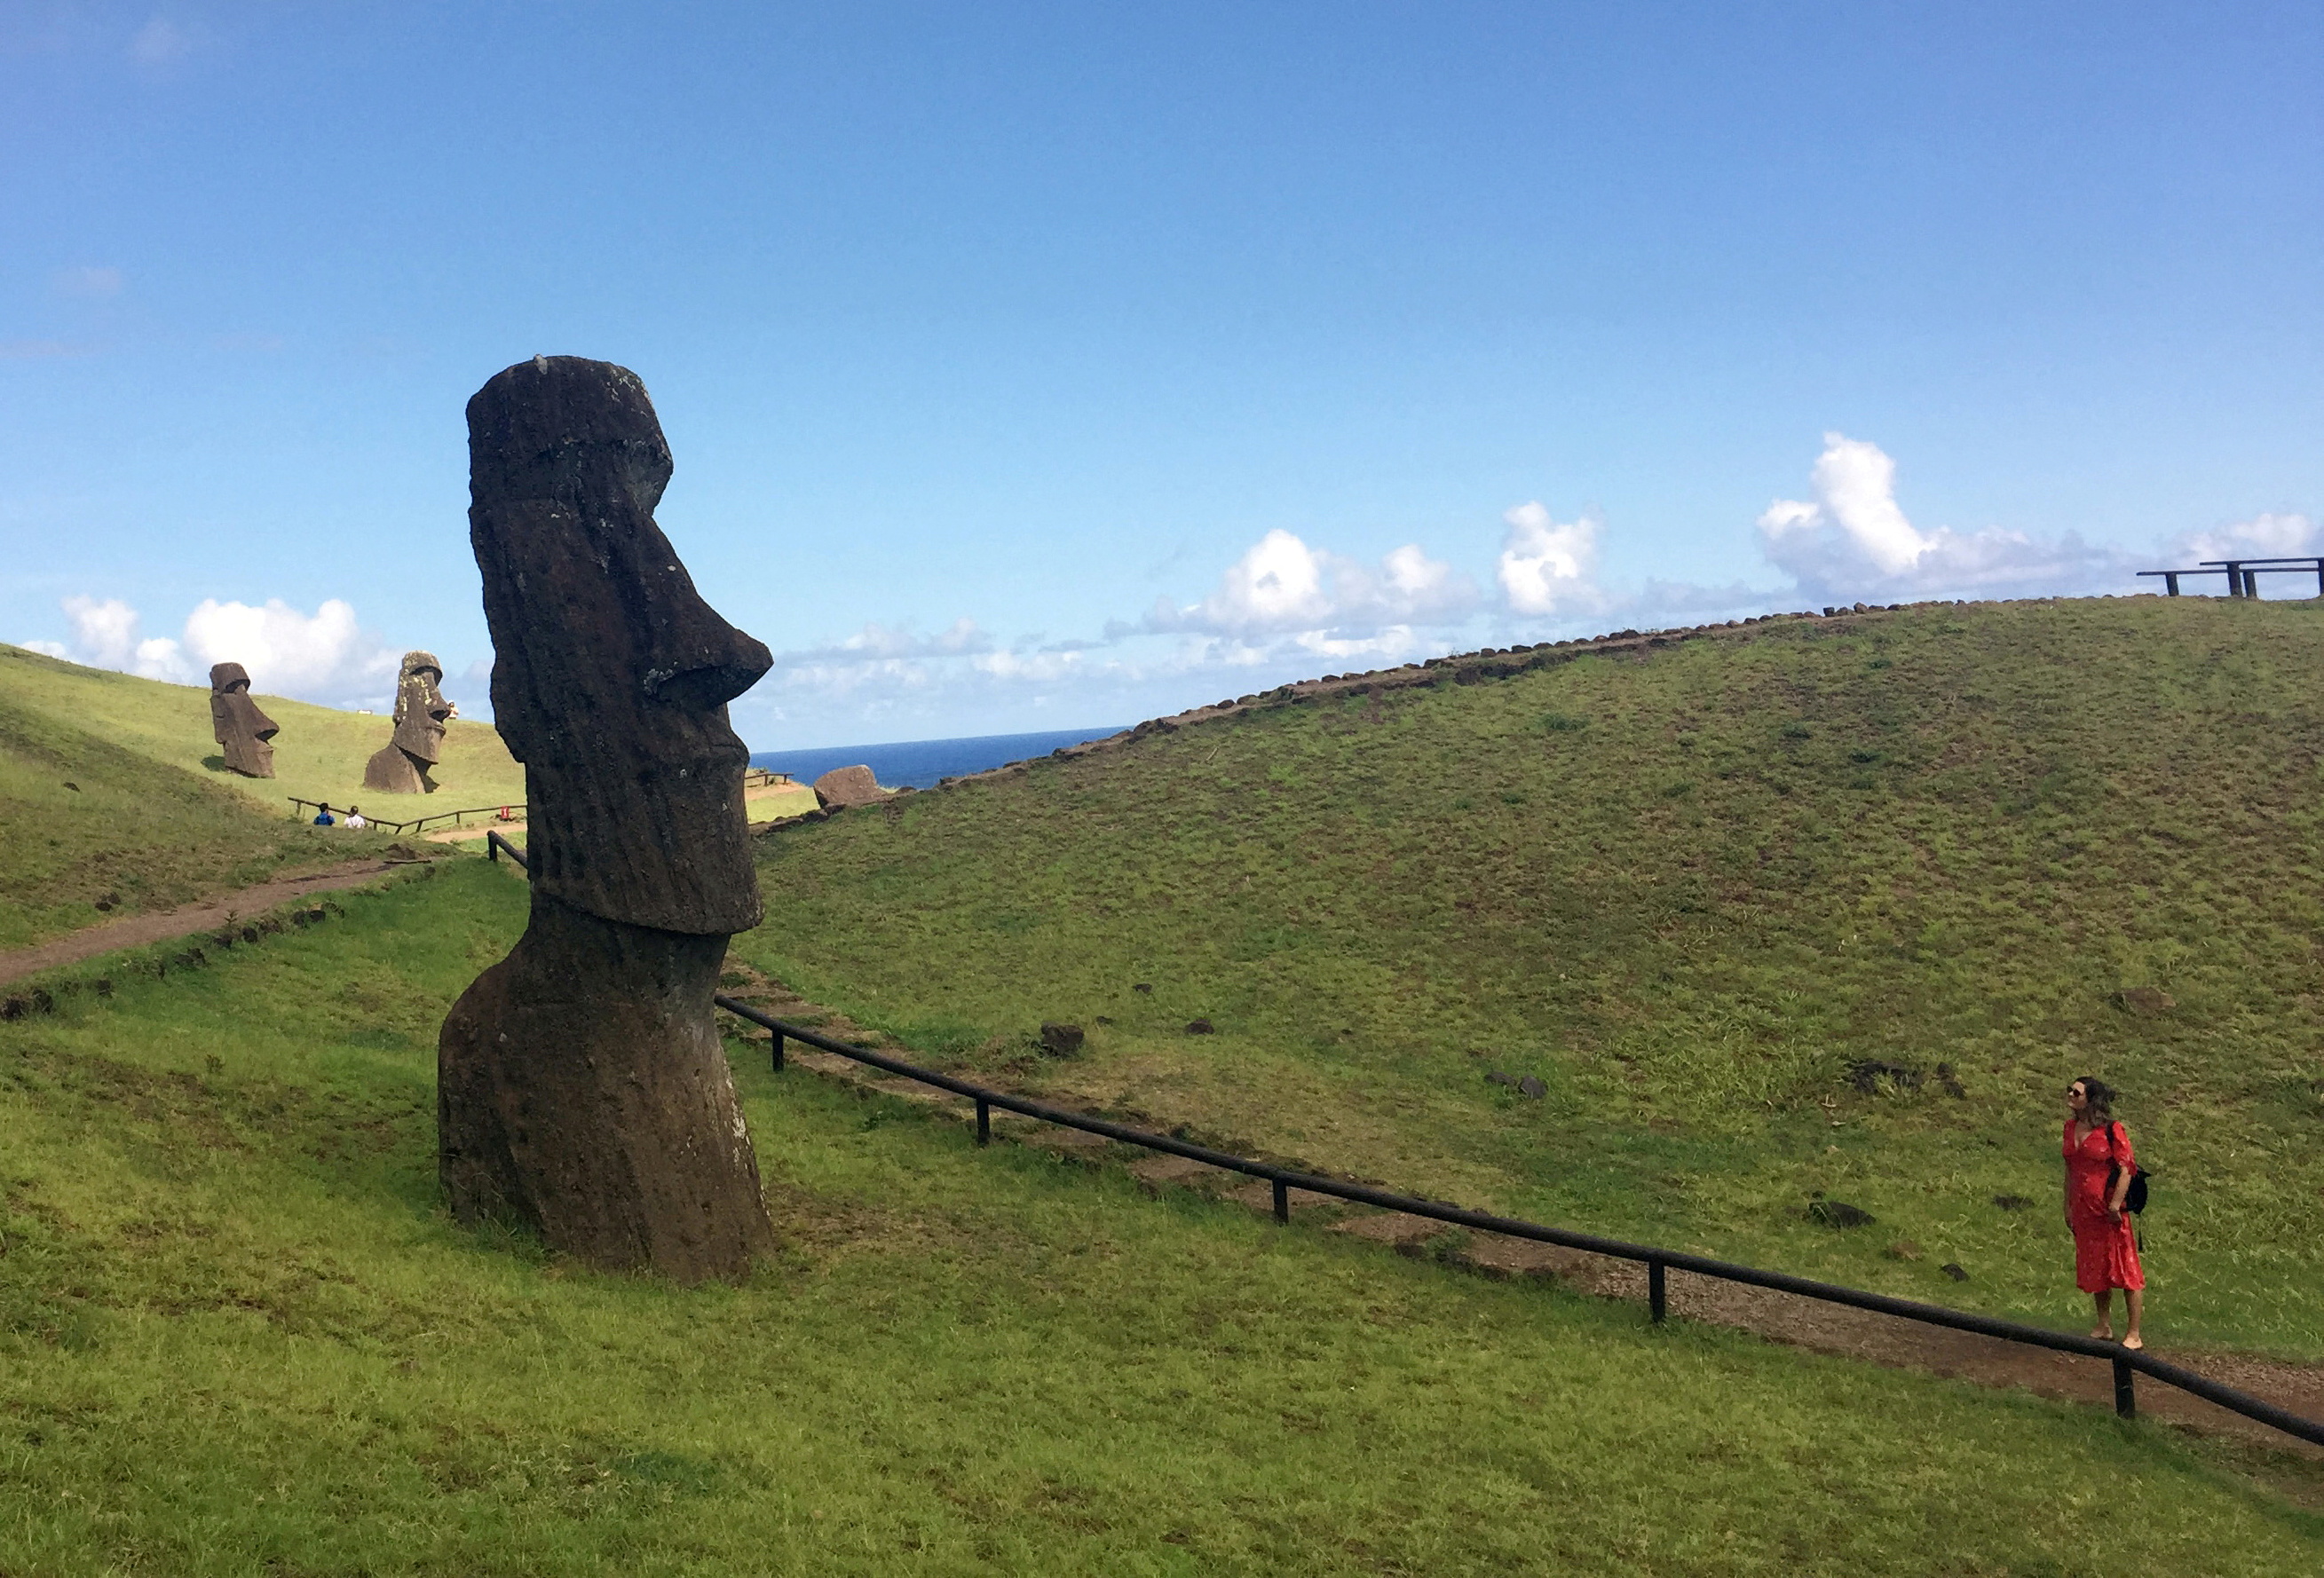 Chile will reopen Easter Island to tourists in August